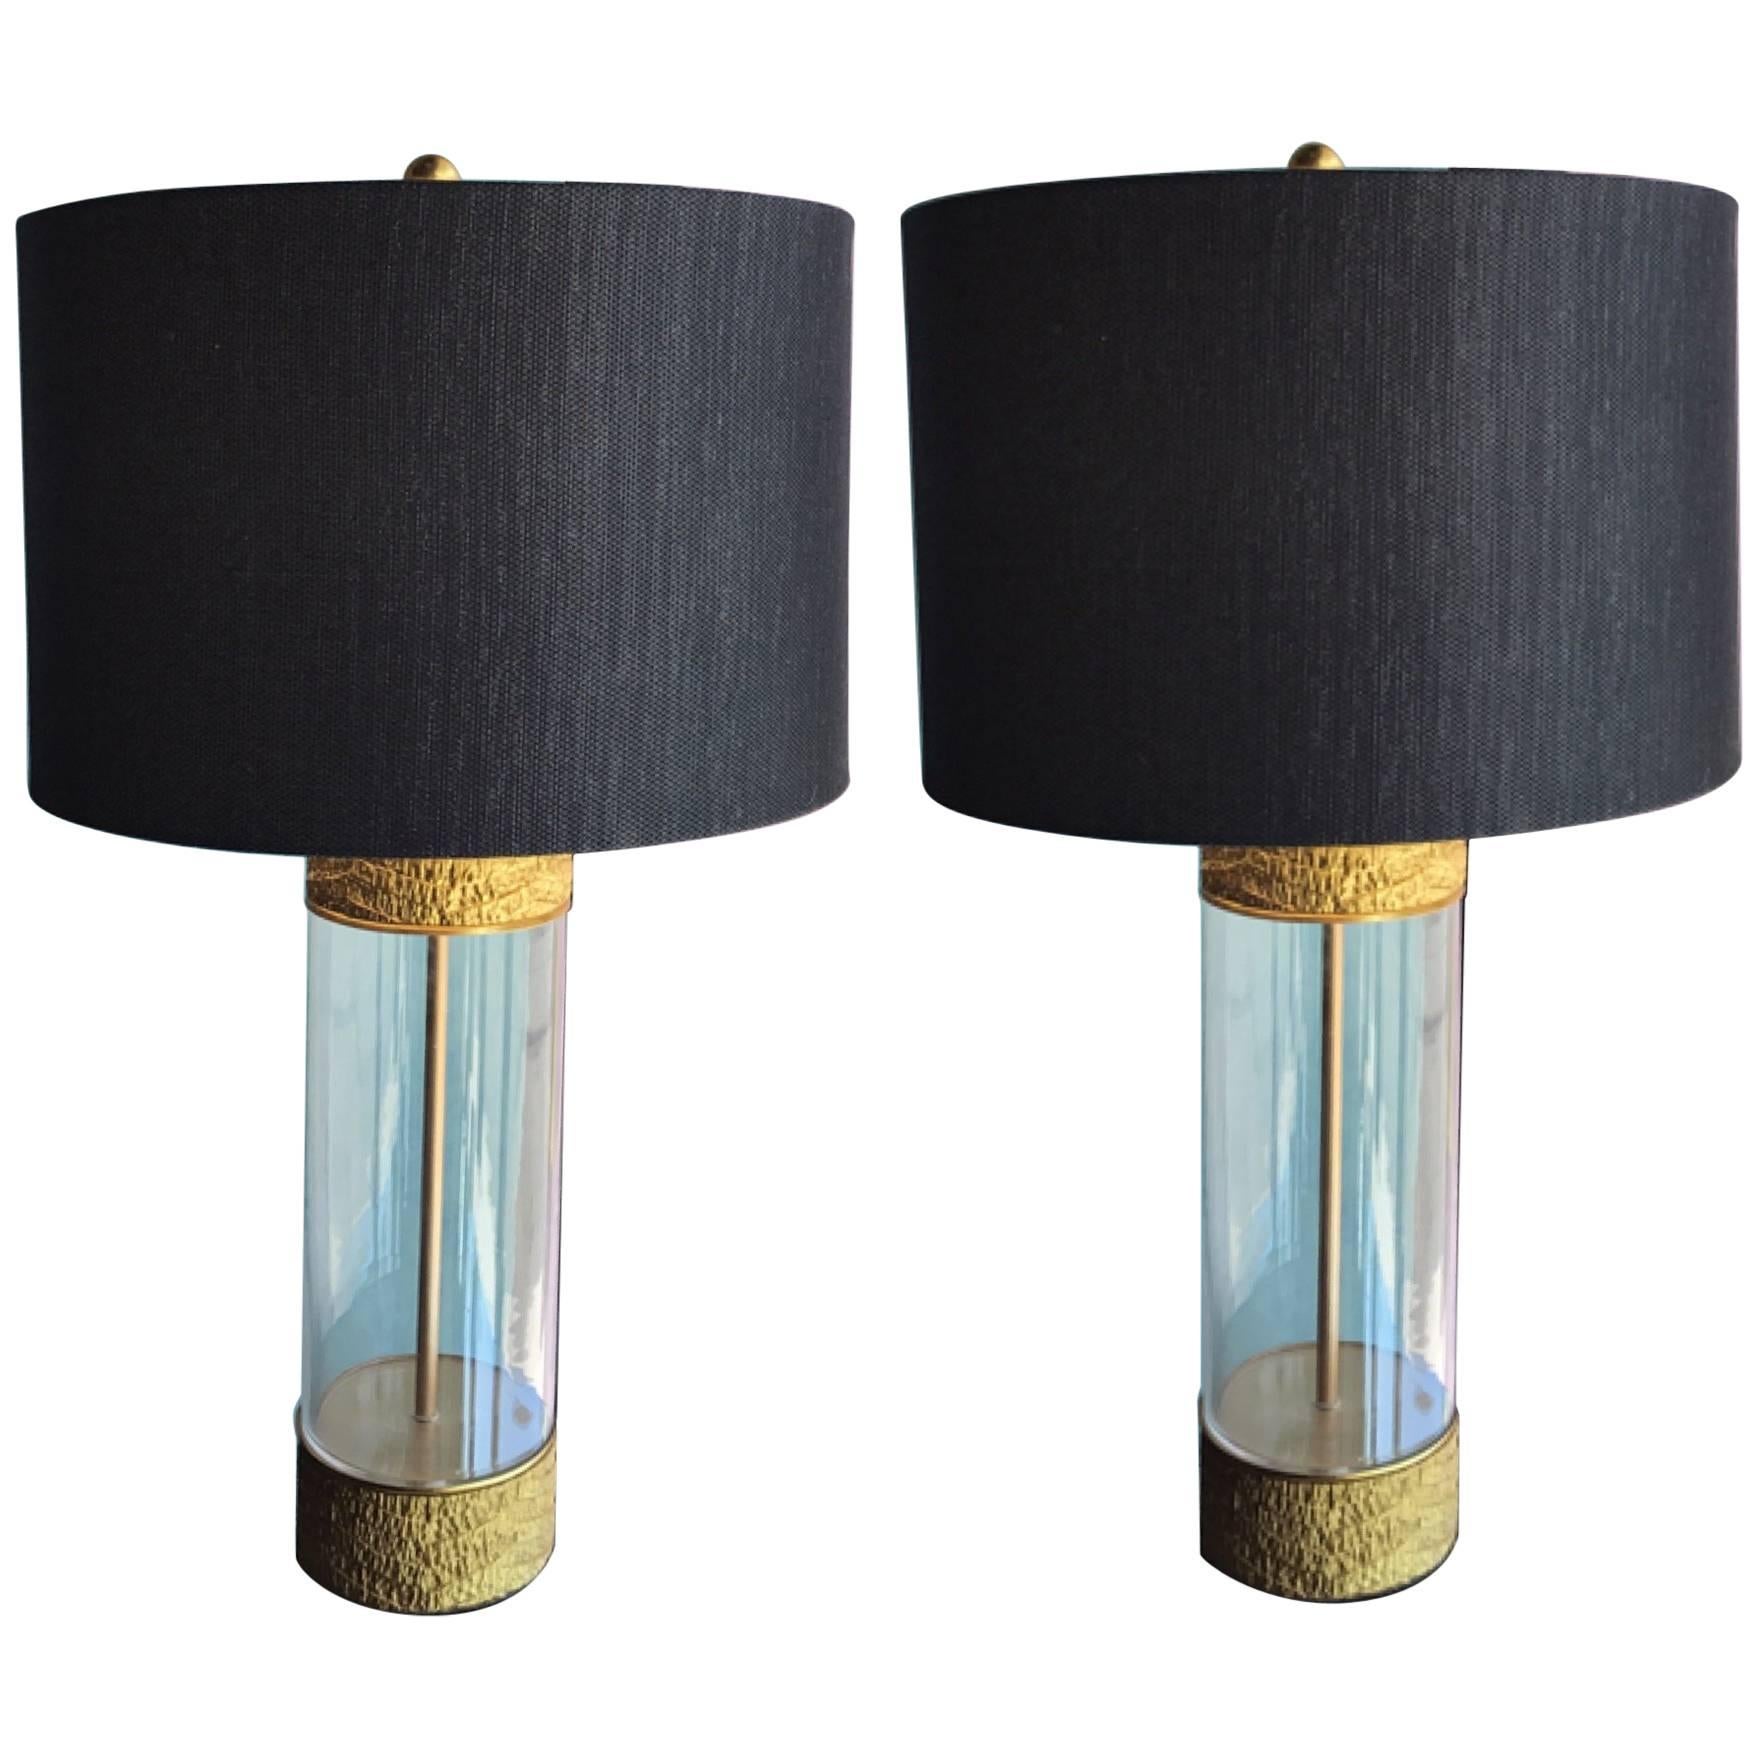 Pair of Very Chic Gold, Glass, Modern Table Lamps in the Style of Steve Chase